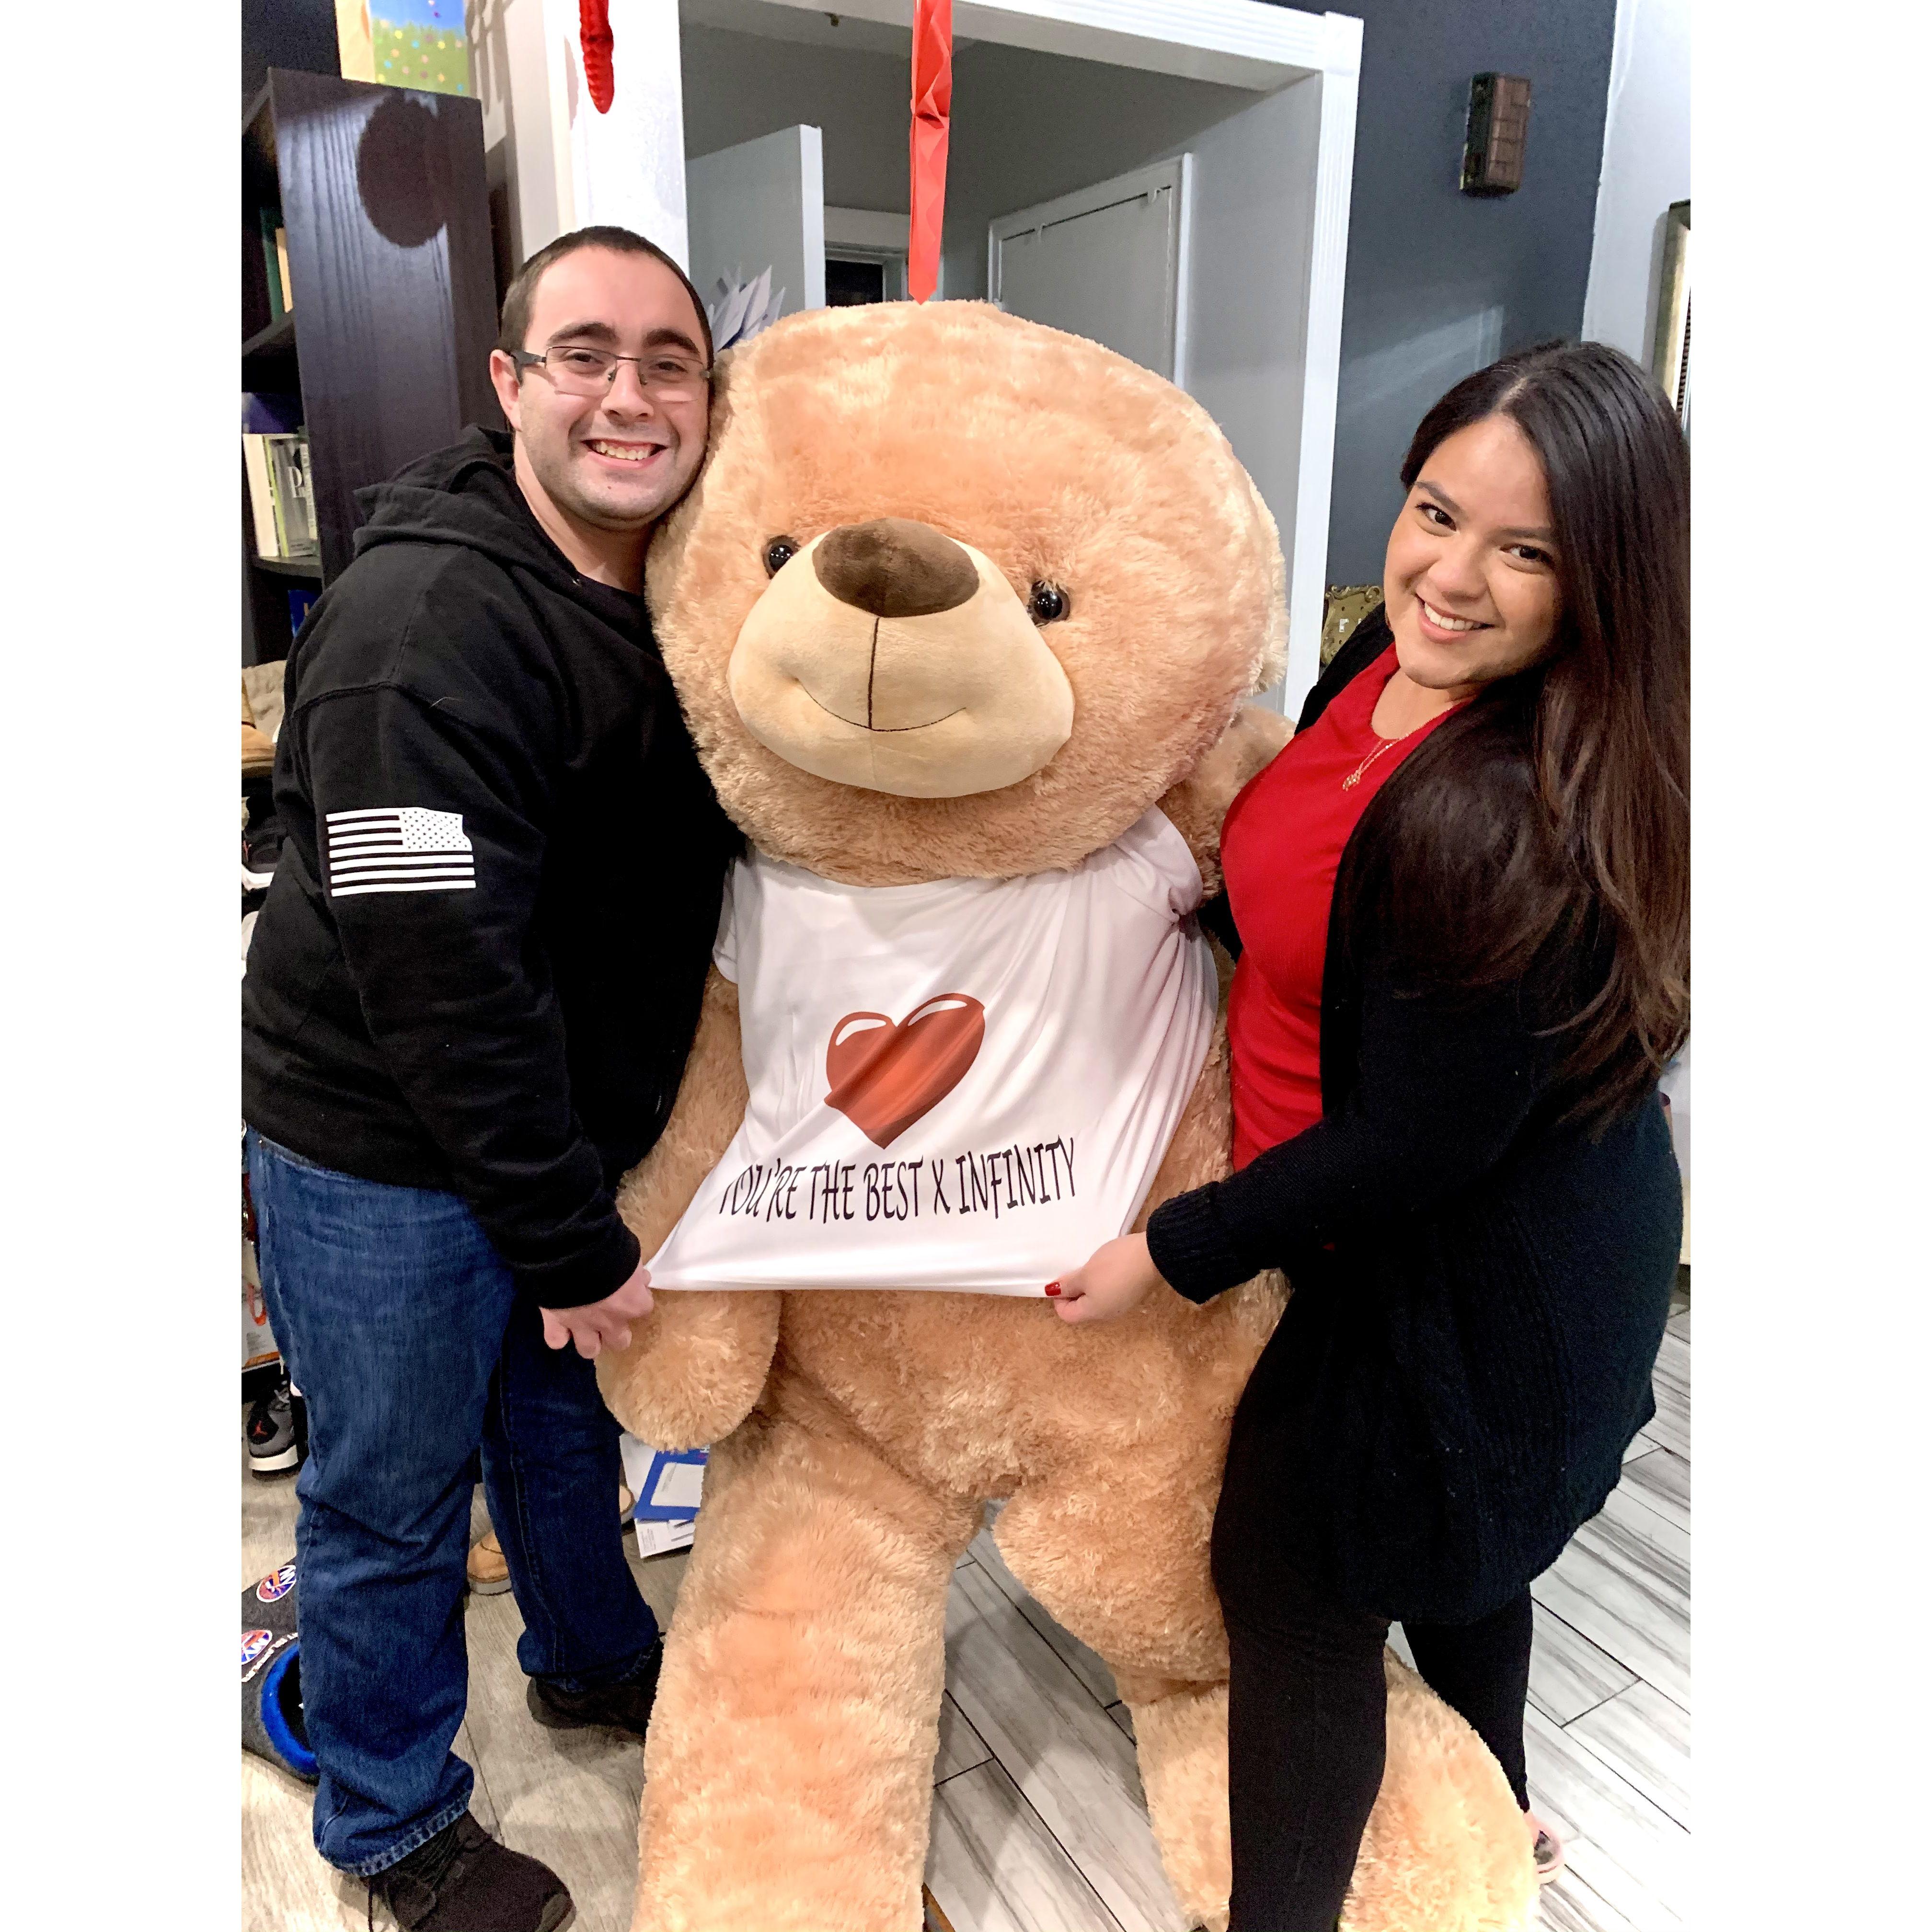 Our first Valentine's together...James went all out and got Gissell a 6ft bear. We named him "Osito".